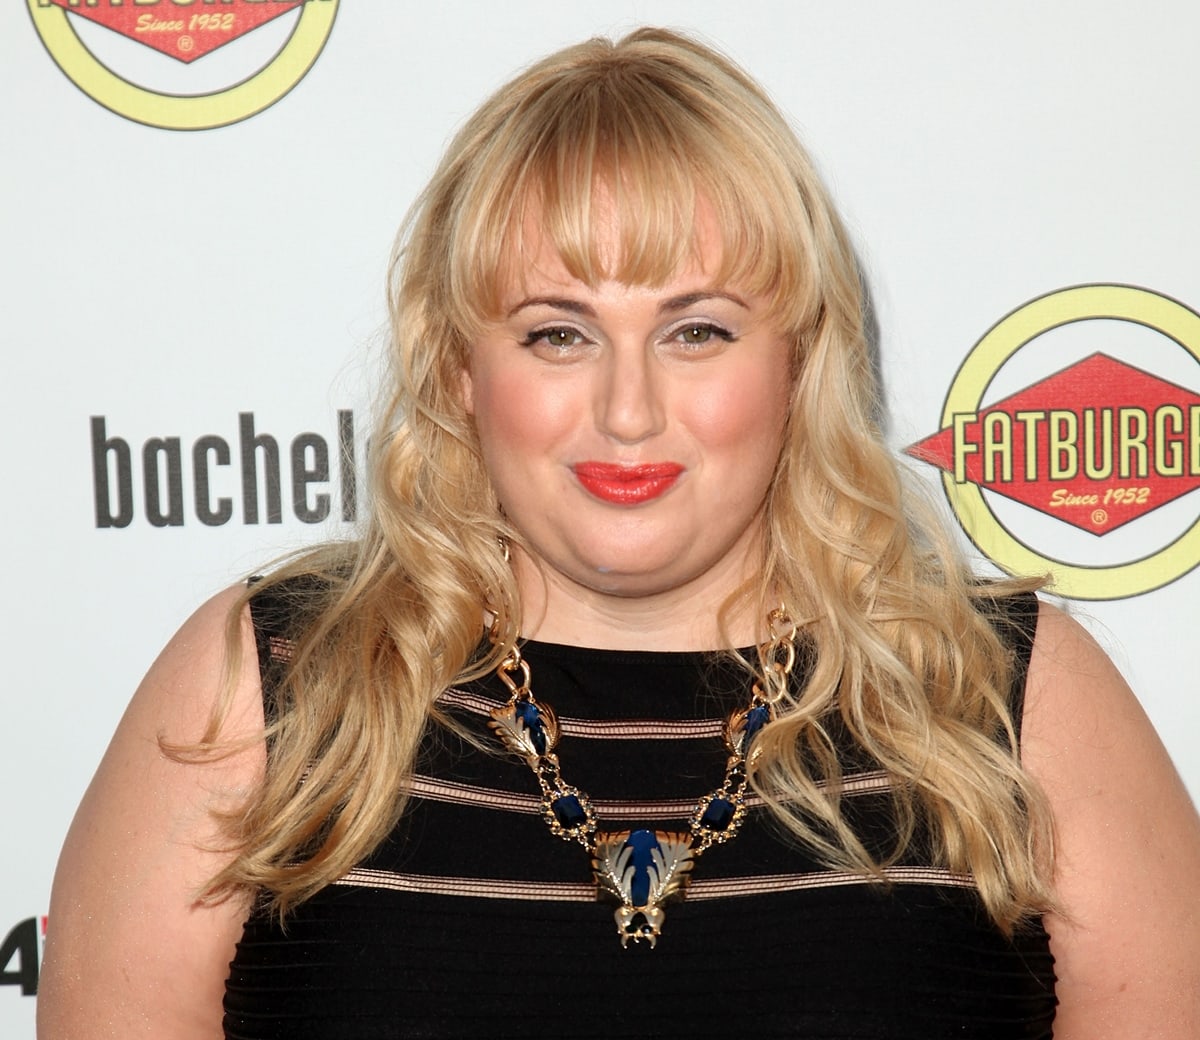 Rebel Wilson claims she has lost 75 pounds thanks to "adequate sleep, walking, hydrating, [and] drinking water"